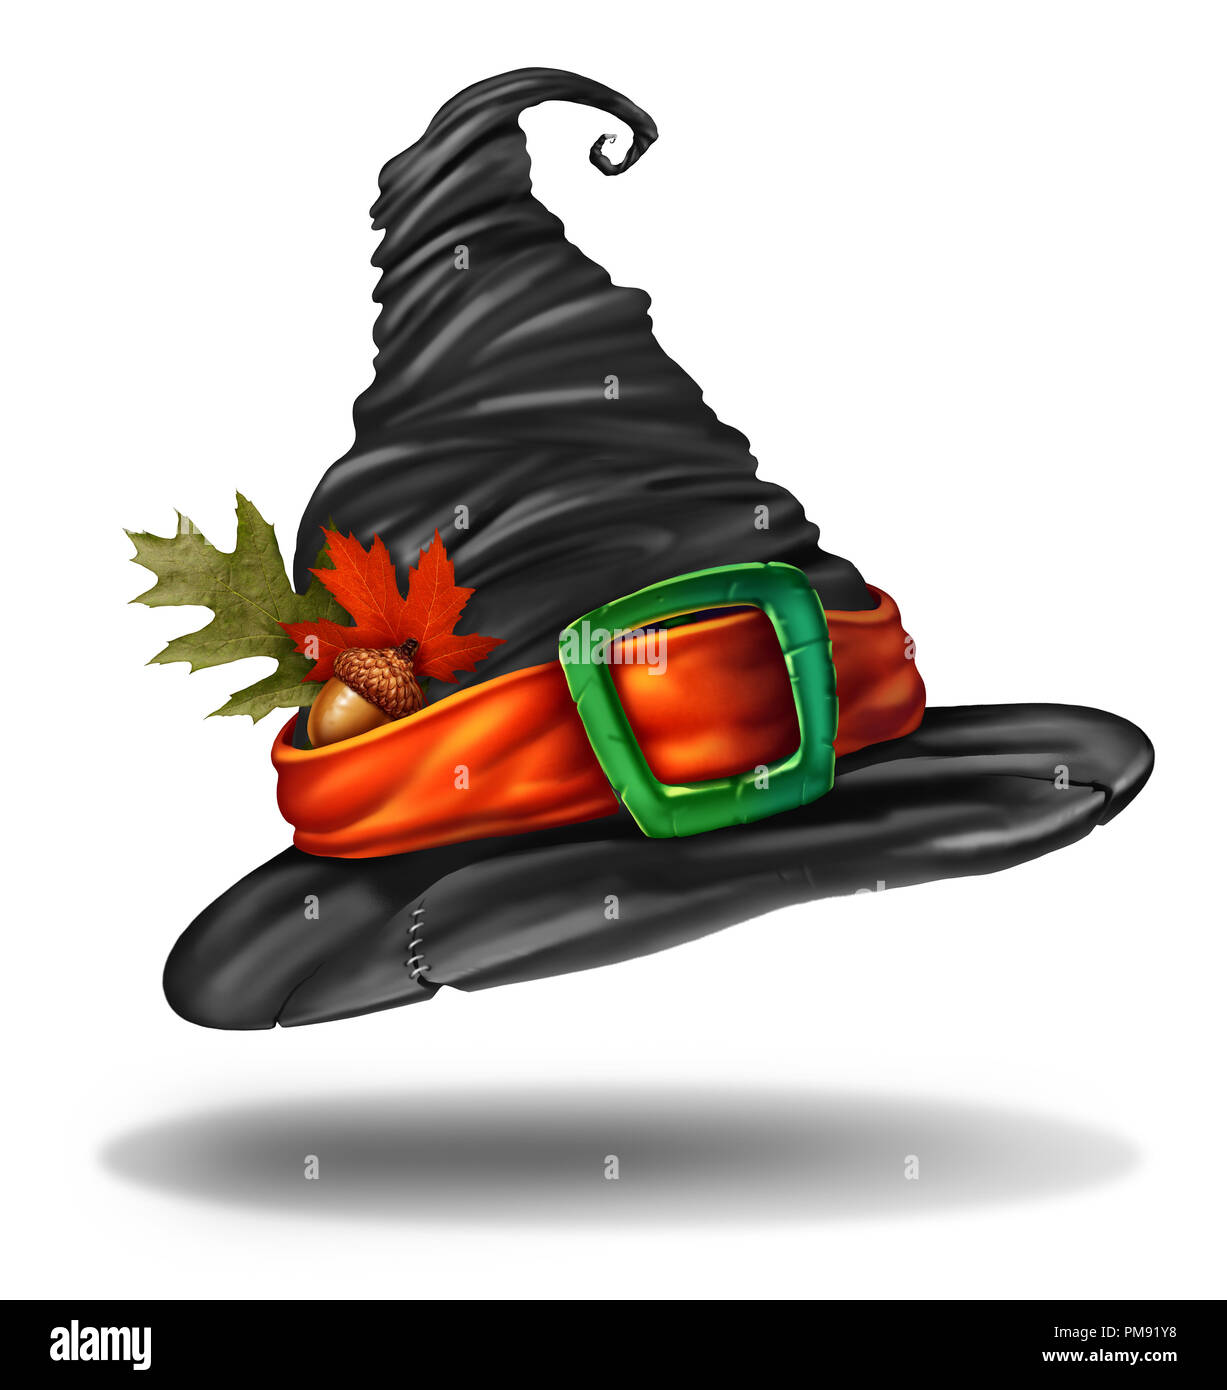 Witch hat halloween autumn clothing object as a spooky fall holiday seasonal and thanksgiving symbol with 3D elements. Stock Photo